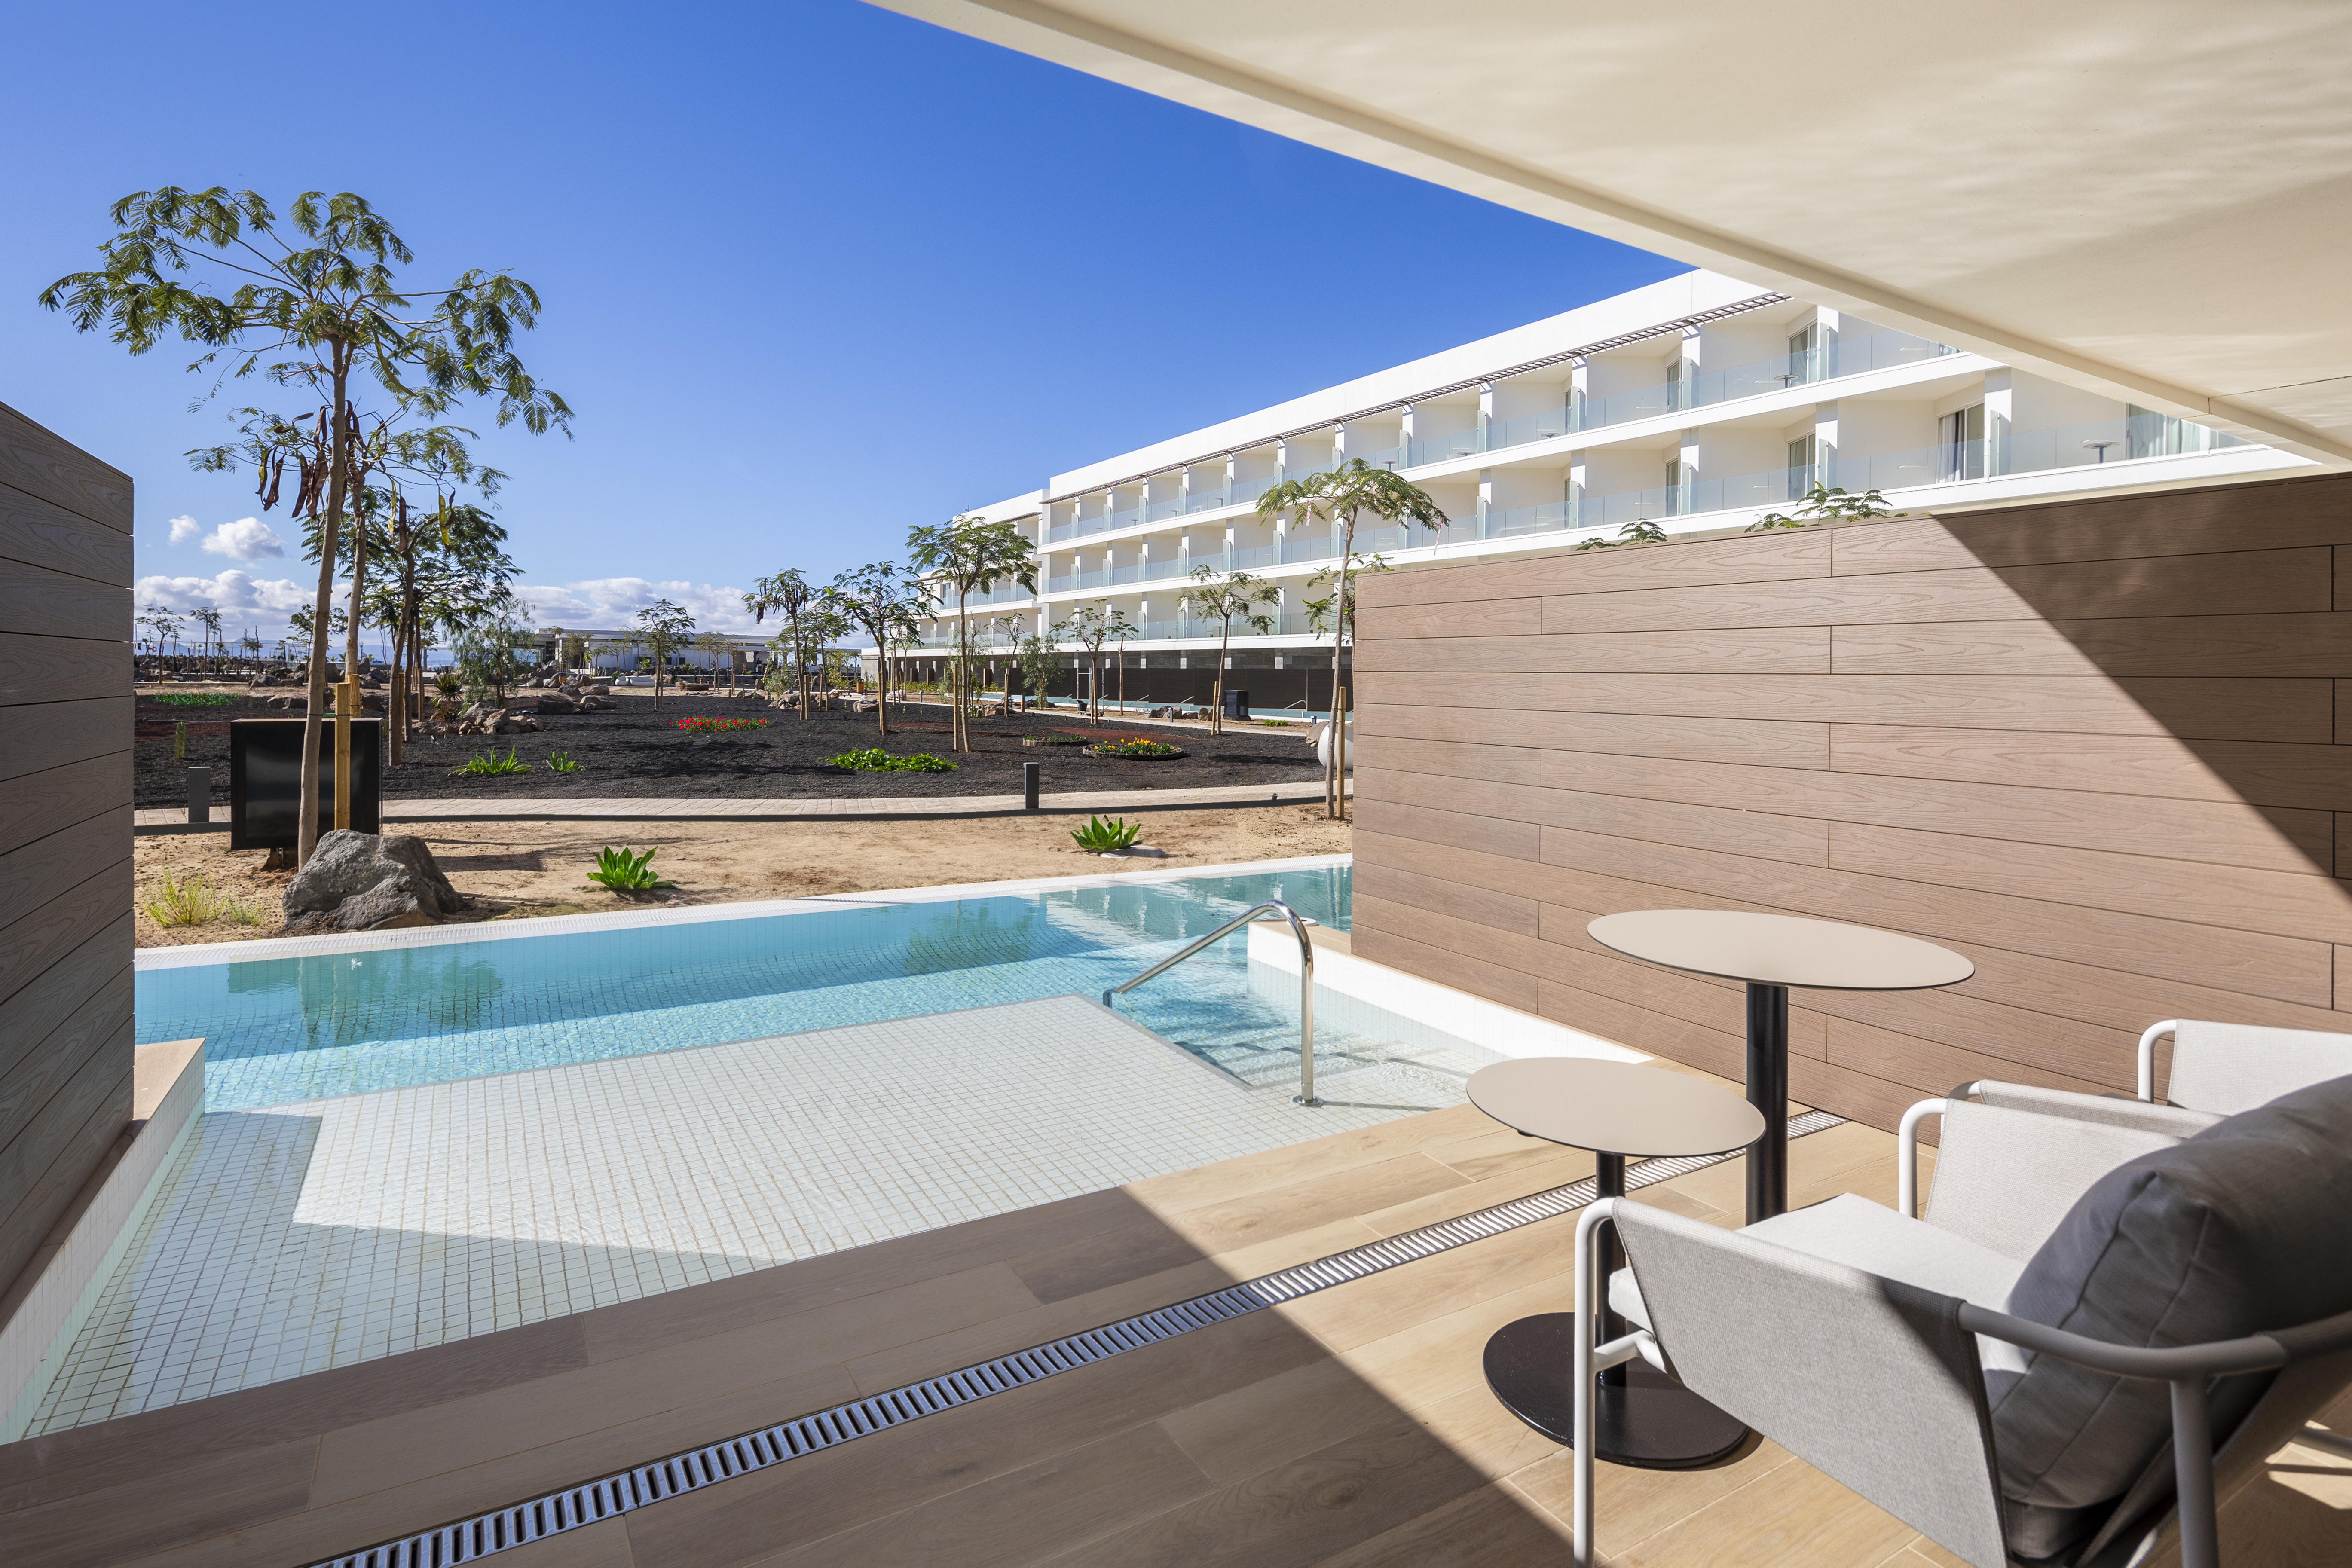 Take a dip from the terrace of the swim-up room